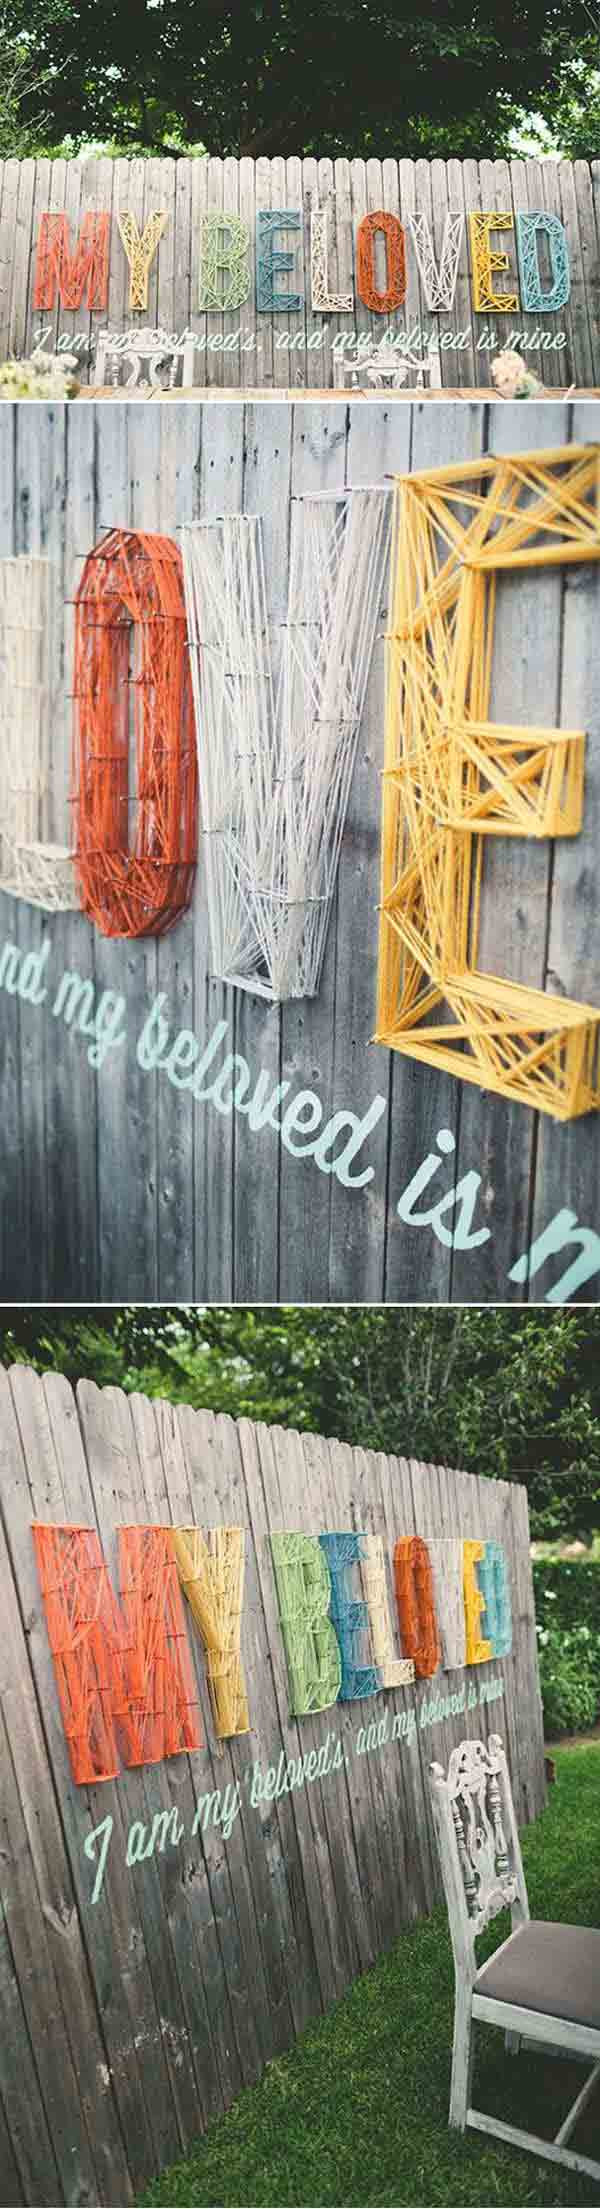 Outdoor Art Projects
 34 Easy and Cheap DIY Art Projects To Dress Up Your Garden